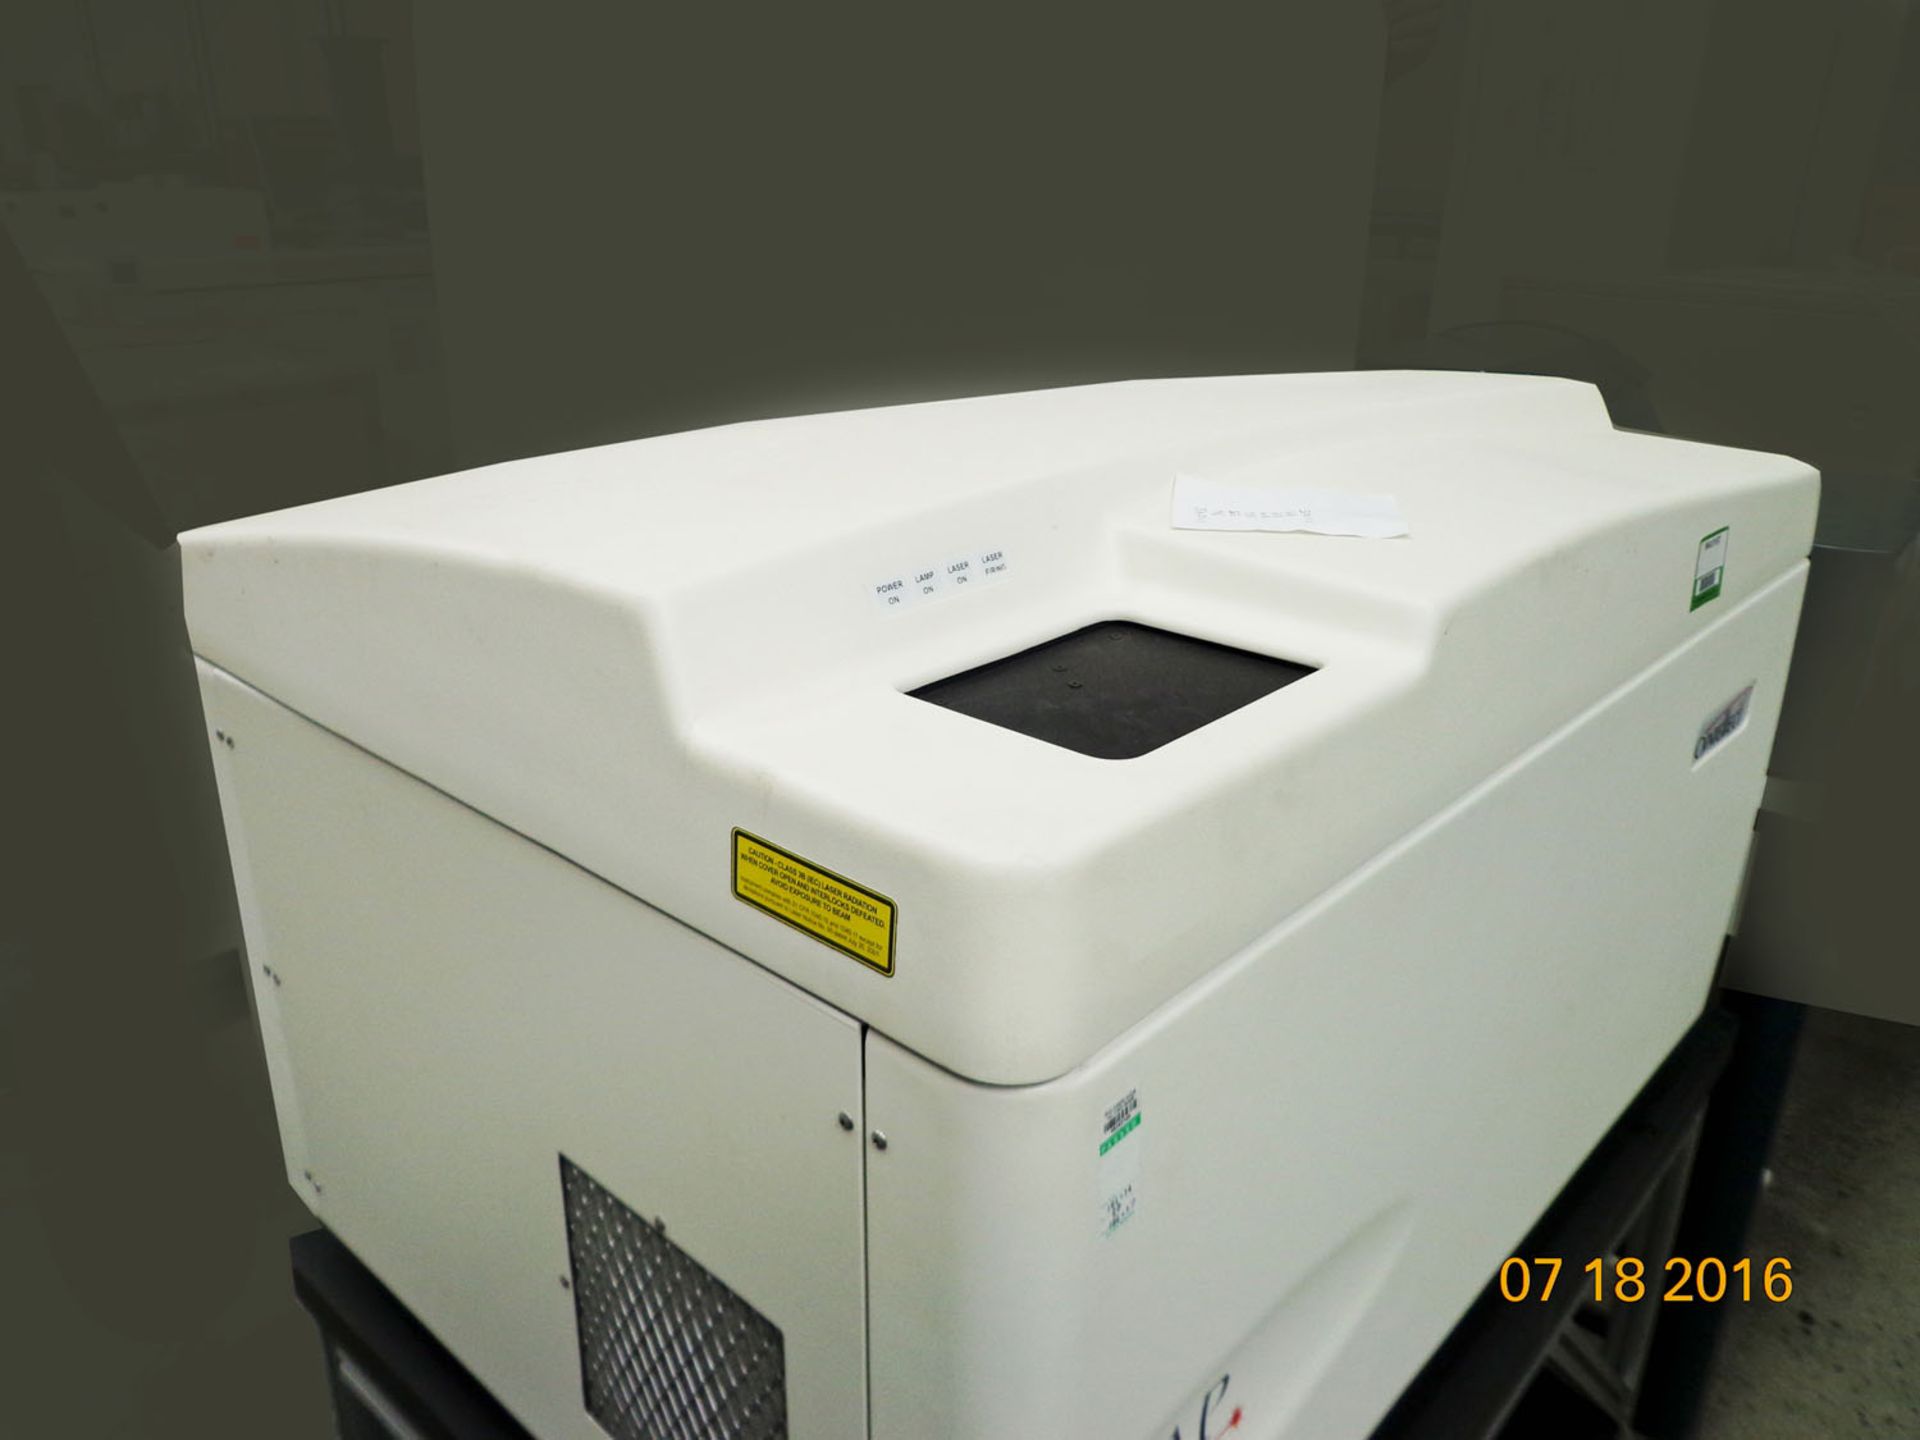 Cyntellect (LEAP) Laser Enable Analysis and Processing system, C2-2901709